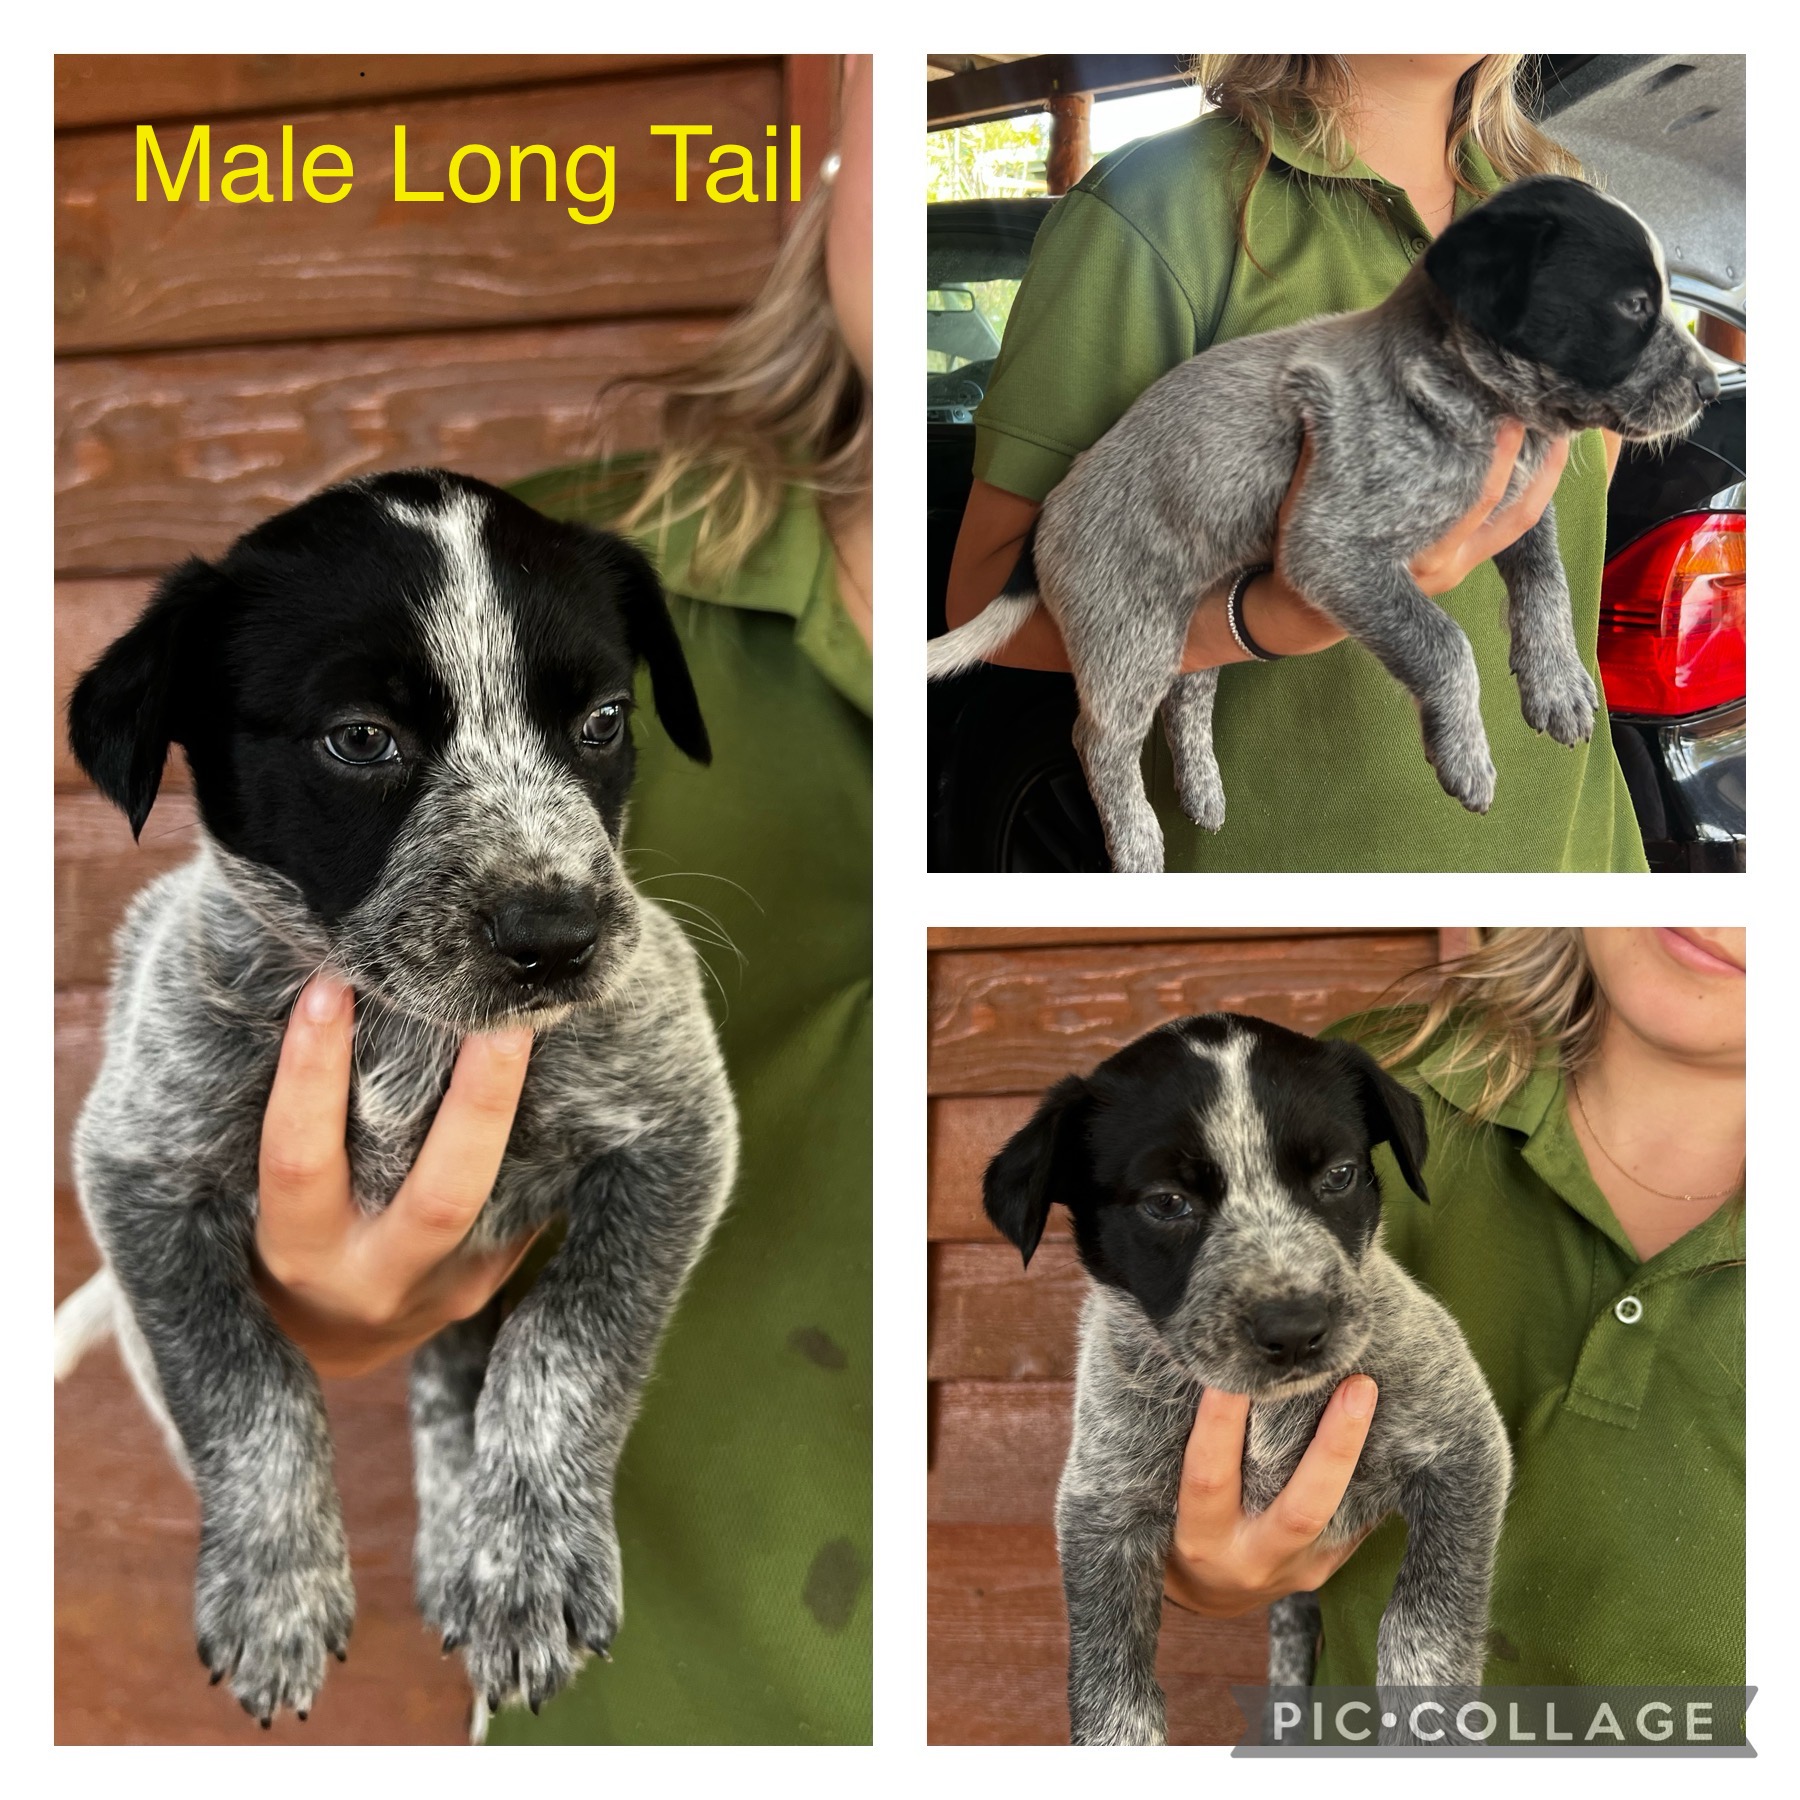 Cattle dog puppies